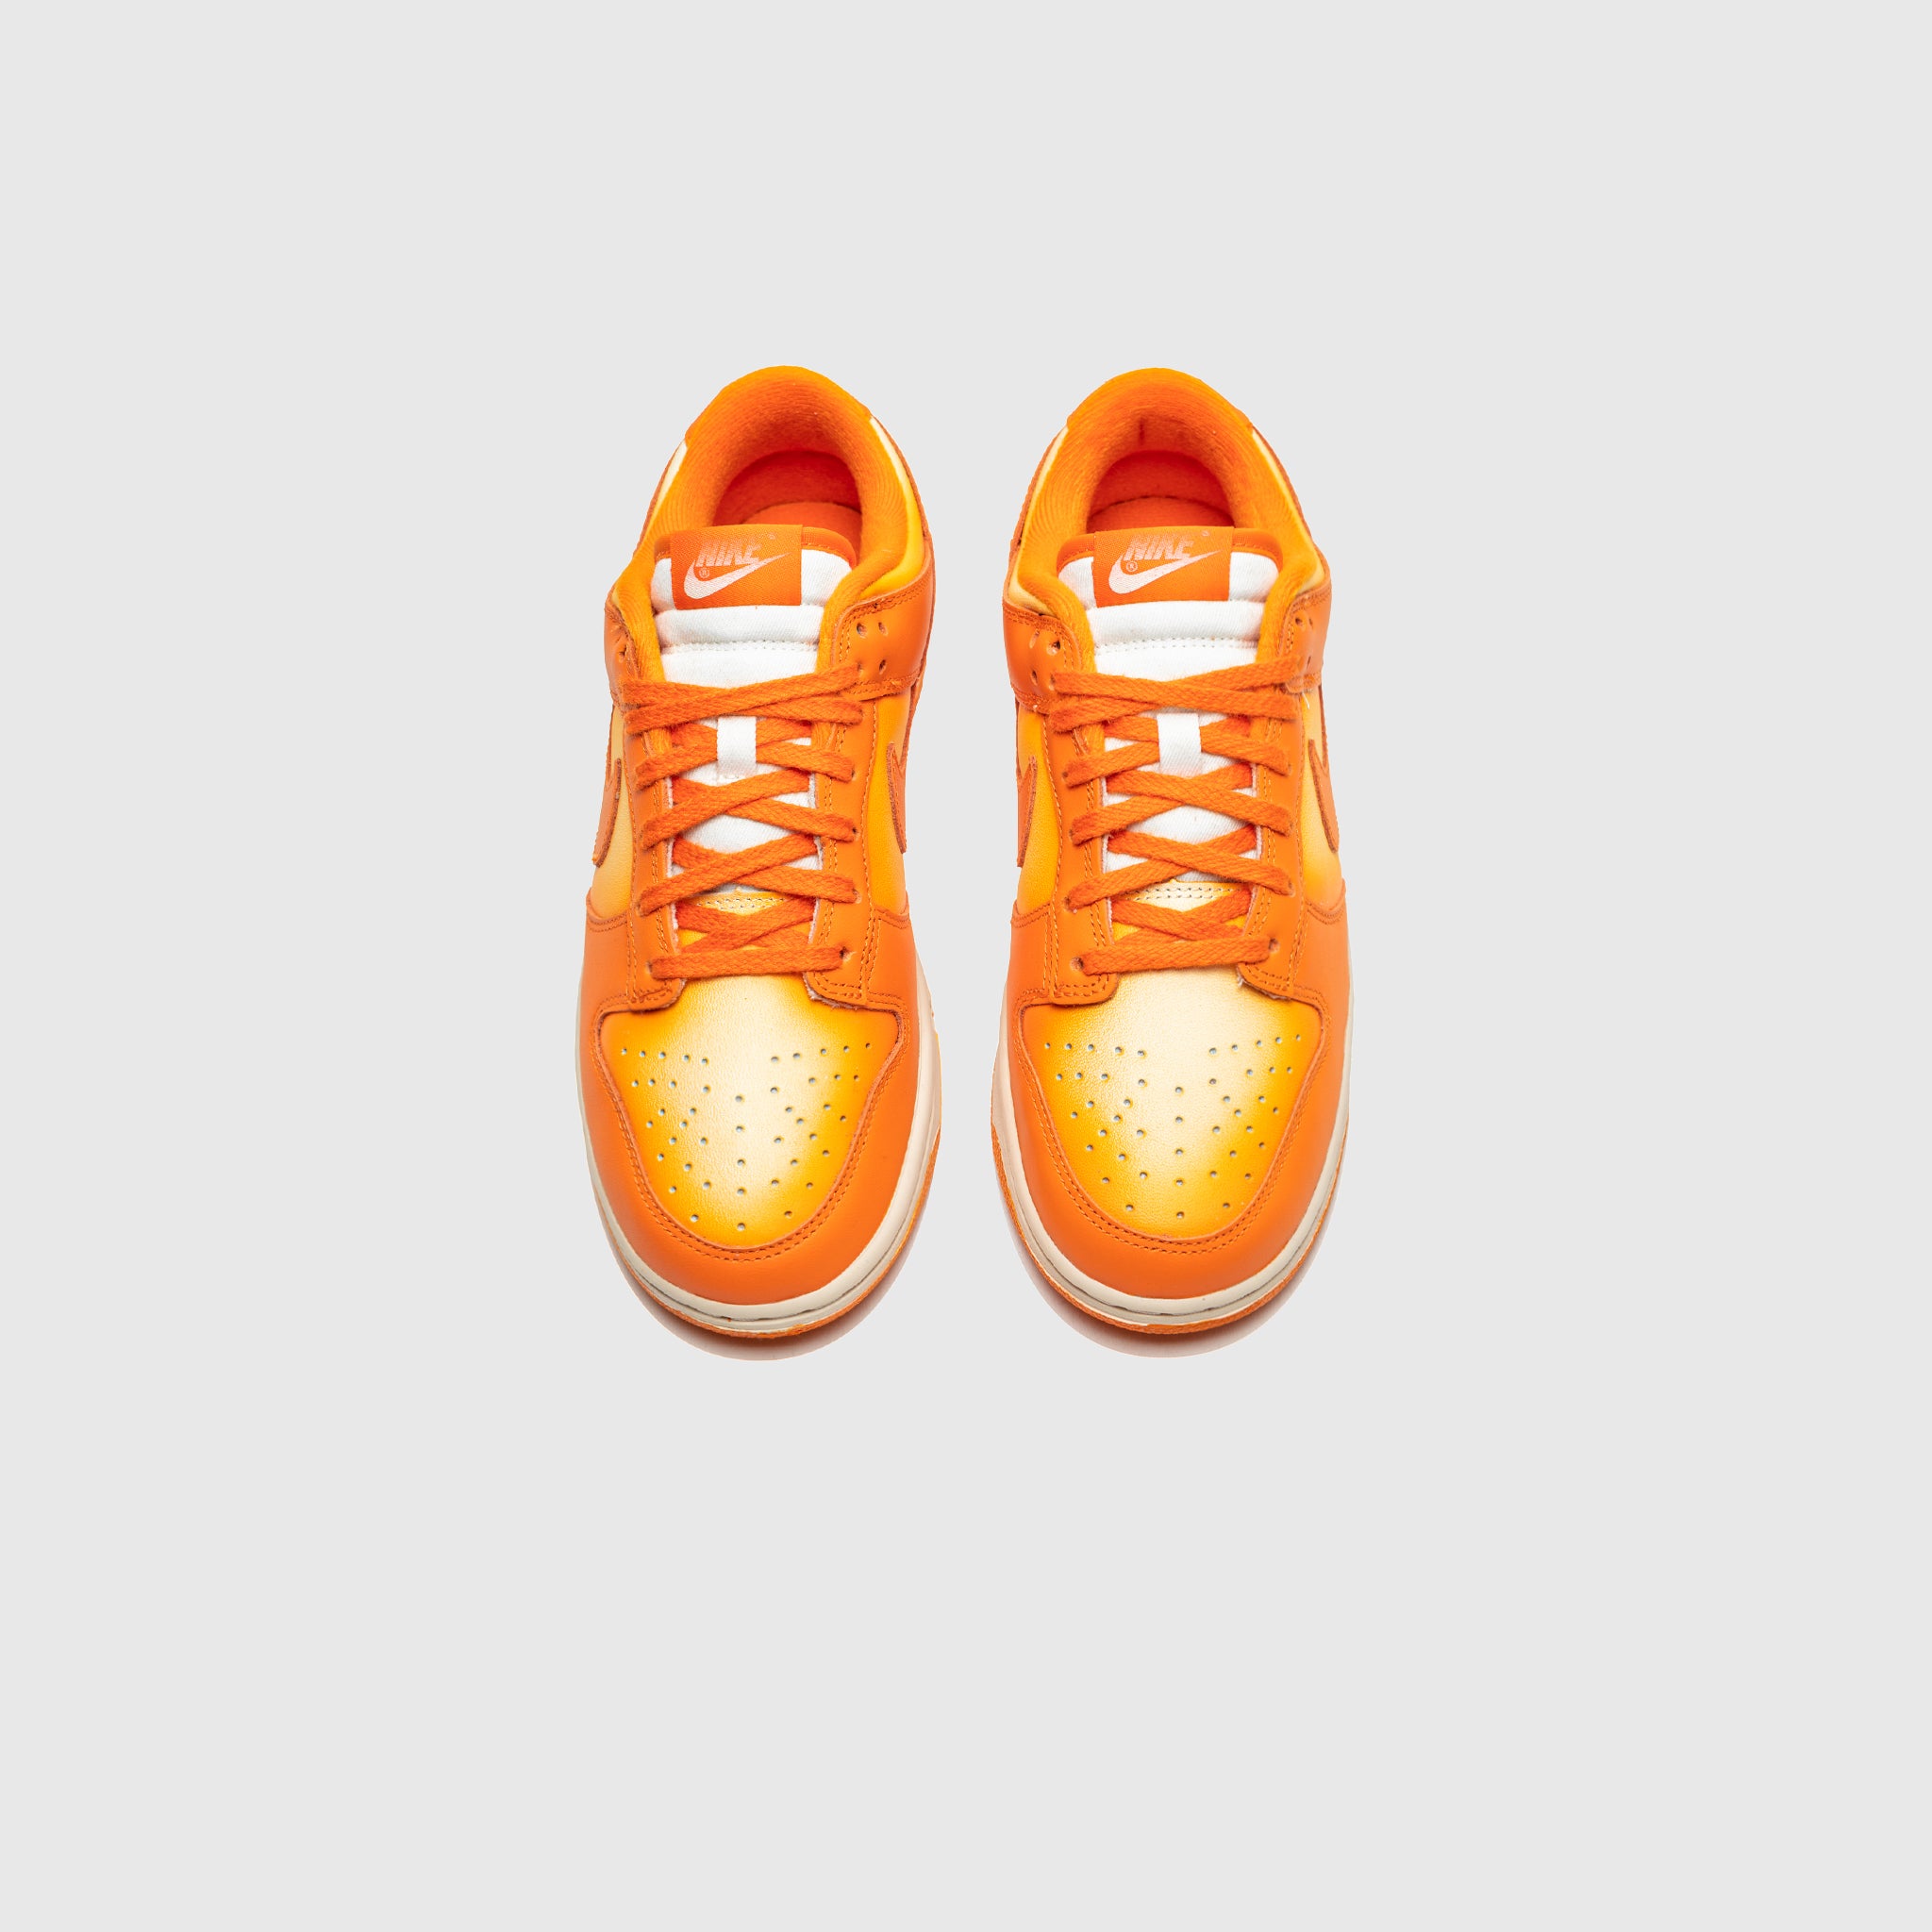 WMNS LOW SE "MAGMA – PACKER SHOES